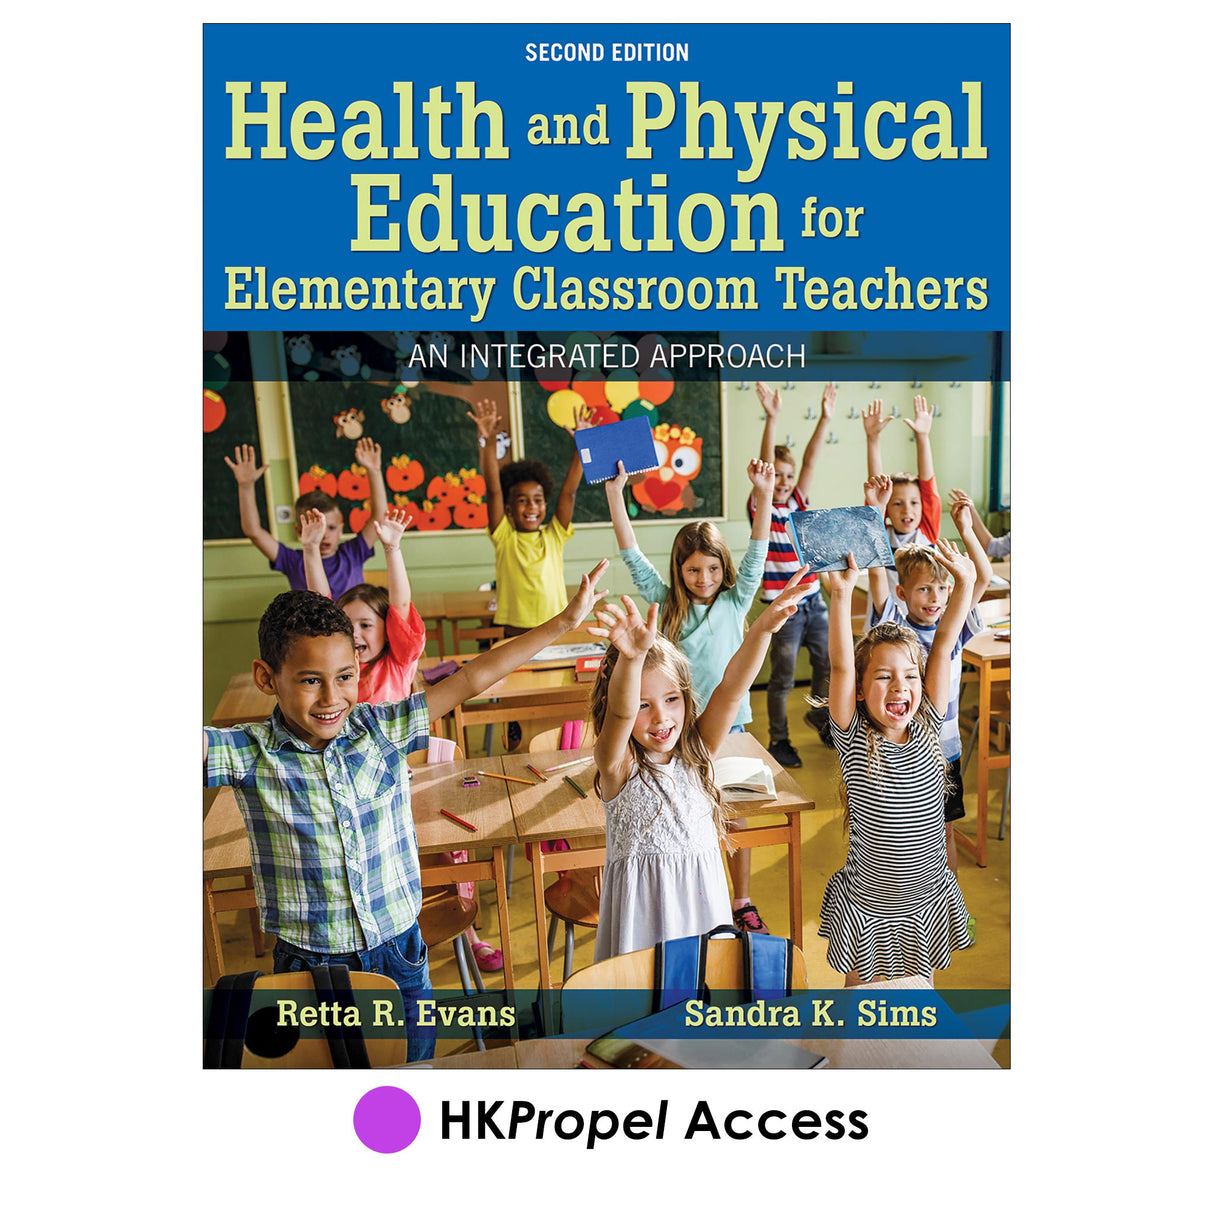 Health and Physical Education for Elementary Classroom Teachers 2nd Edition HKPropel Access